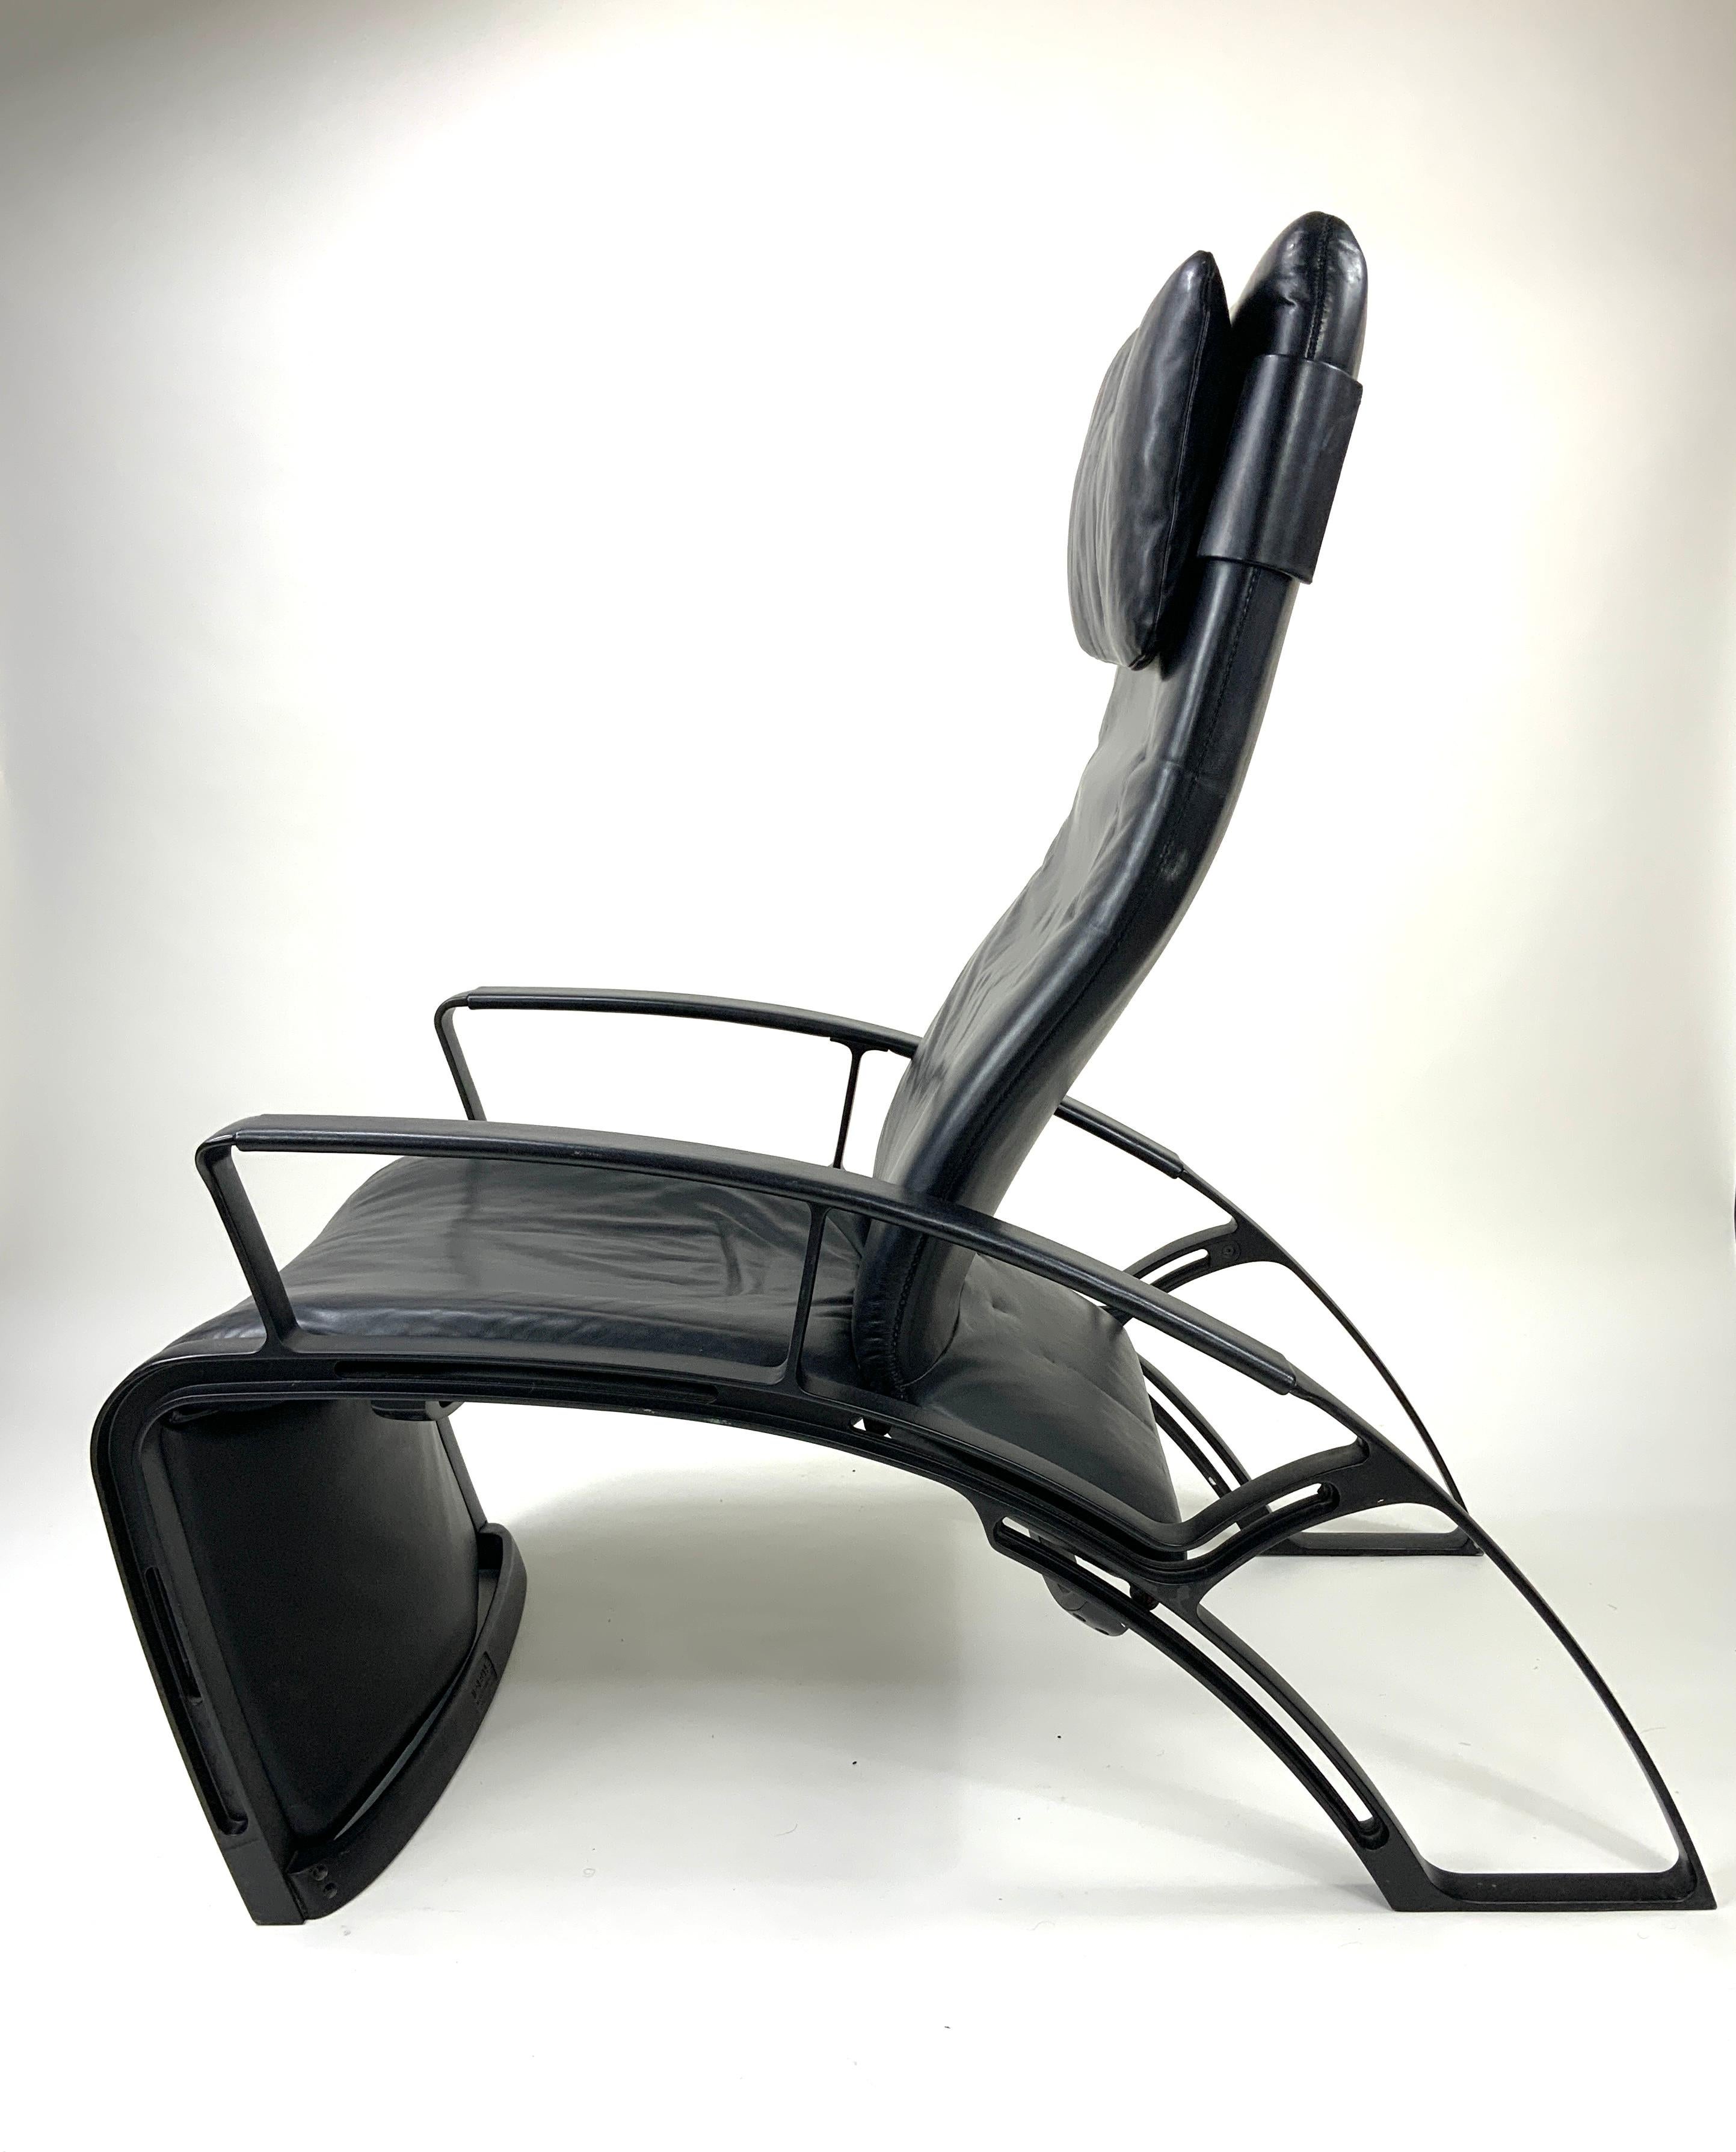 Original reclining lounge chair designed by Ferdinand Porsche whose name is synonymous with sports cars and in particular the Porsche 911. In 1984, he designed the IP84 lounge chair for the German company INTERPROFIL GmBH.

It has a black metal